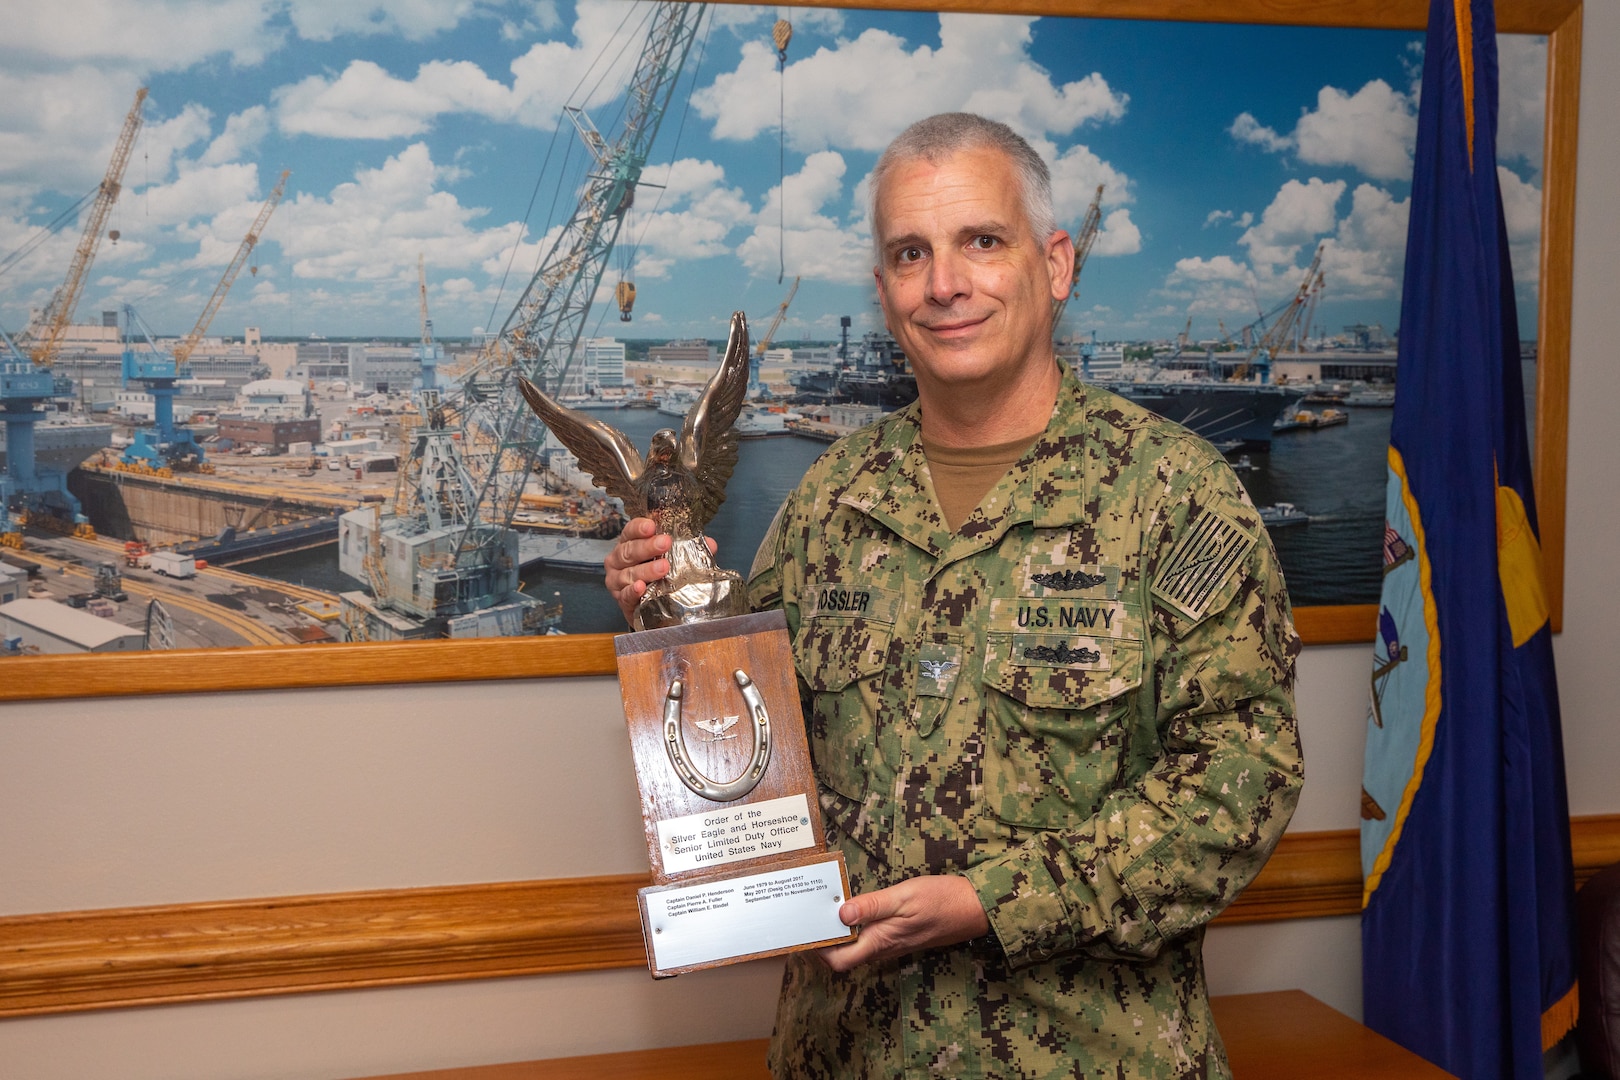 Capt. Dan Rossler was recognized as the "Silver Eagle" in 2019 - the senior-most LDO in the Navy who is charged with not only reminding the LDO community of the challenges and accomplishments faced during their careers but also of their responsibility to mentor the future of the Navy.